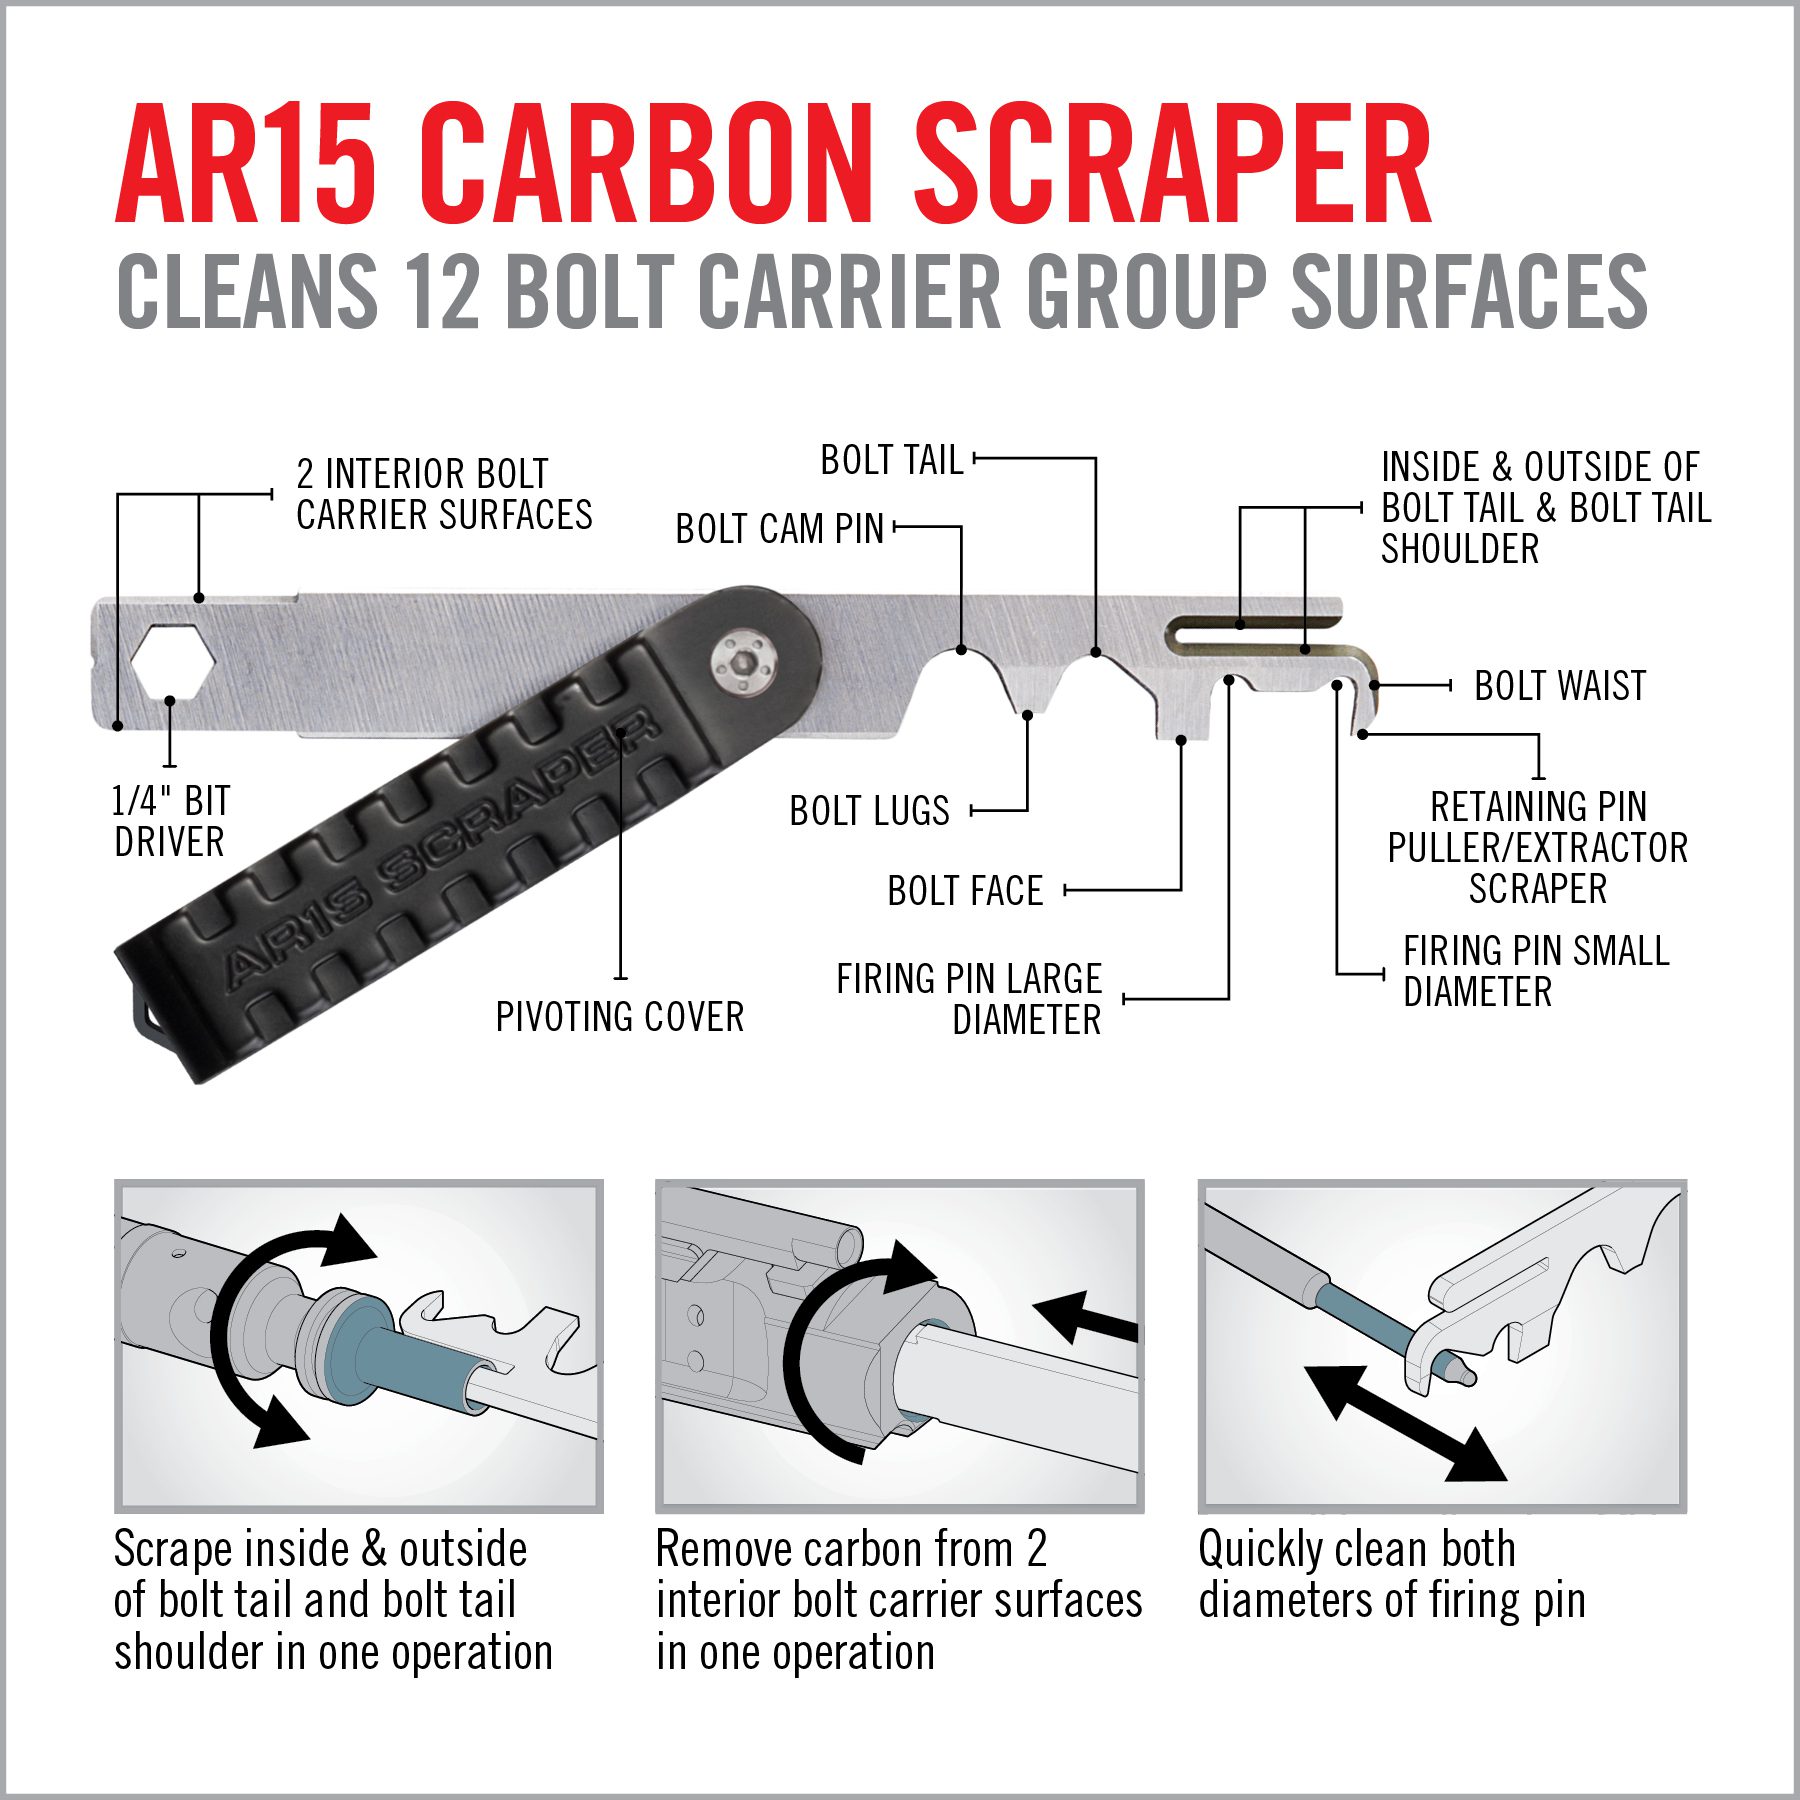 a diagram showing how to use the art5 carbon scraper